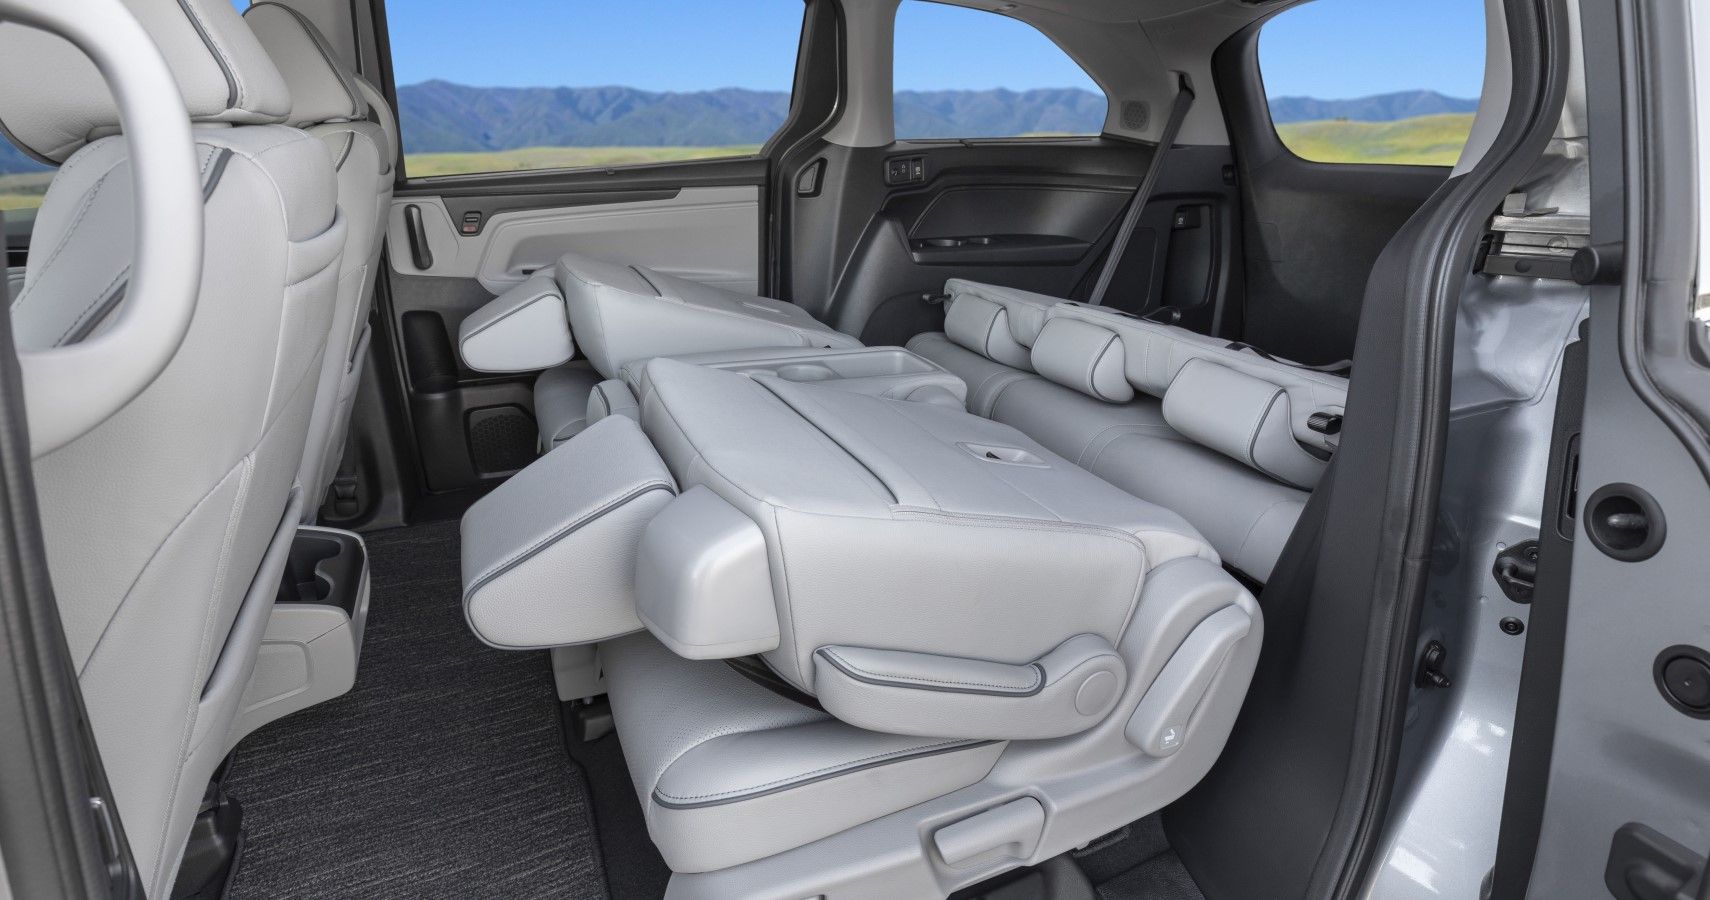 2023 Honda Odyssey flexible second and third row seating layout view